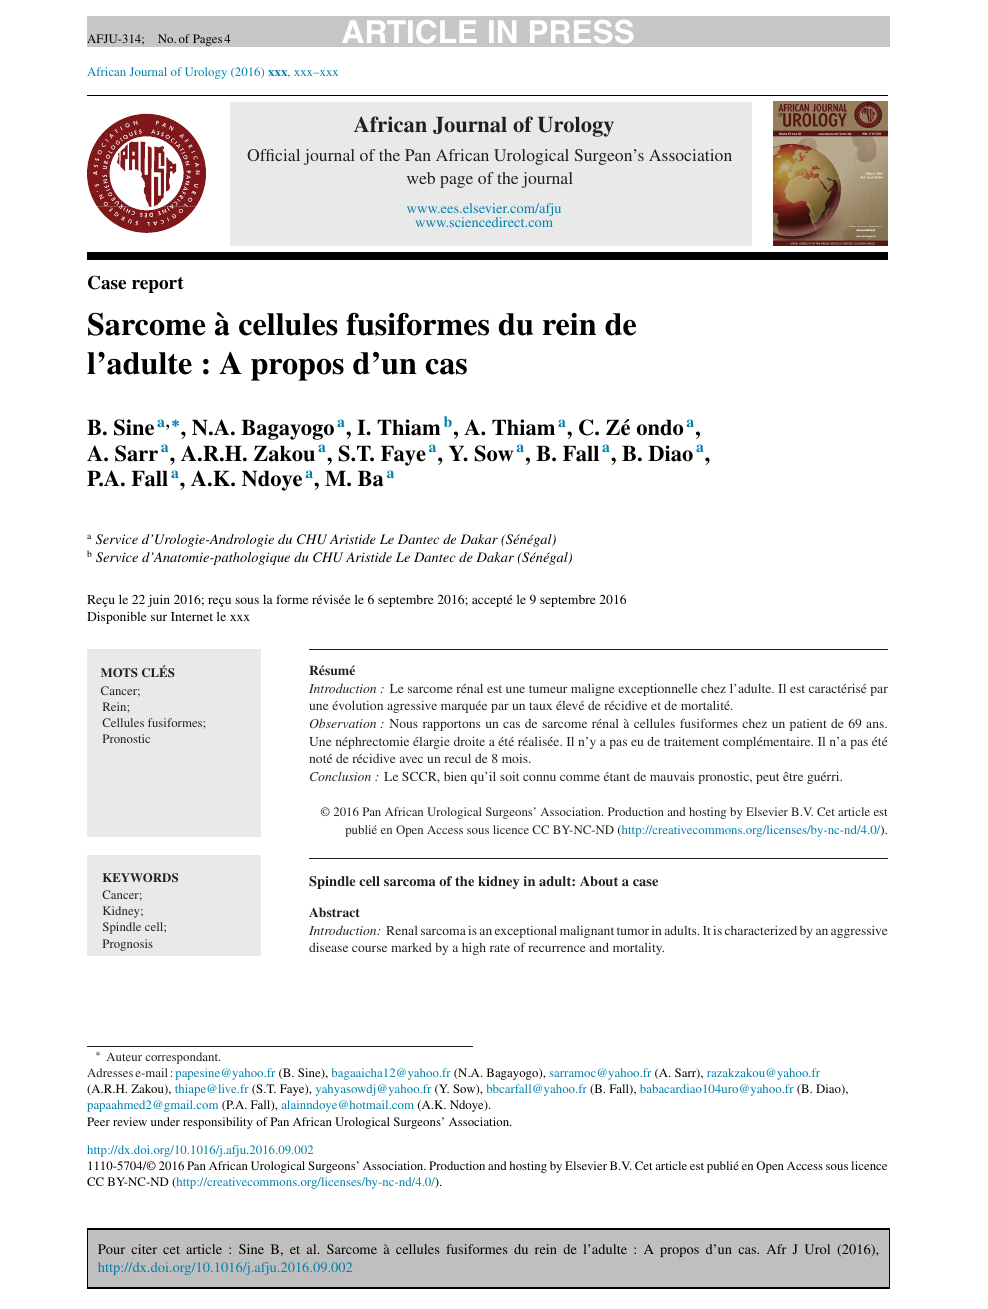 Sarcome A Cellules Fusiformes Du Rein De L Adulte A Propos D Un Cas Topic Of Research Paper In Clinical Medicine Download Scholarly Article Pdf And Read For Free On Cyberleninka Open